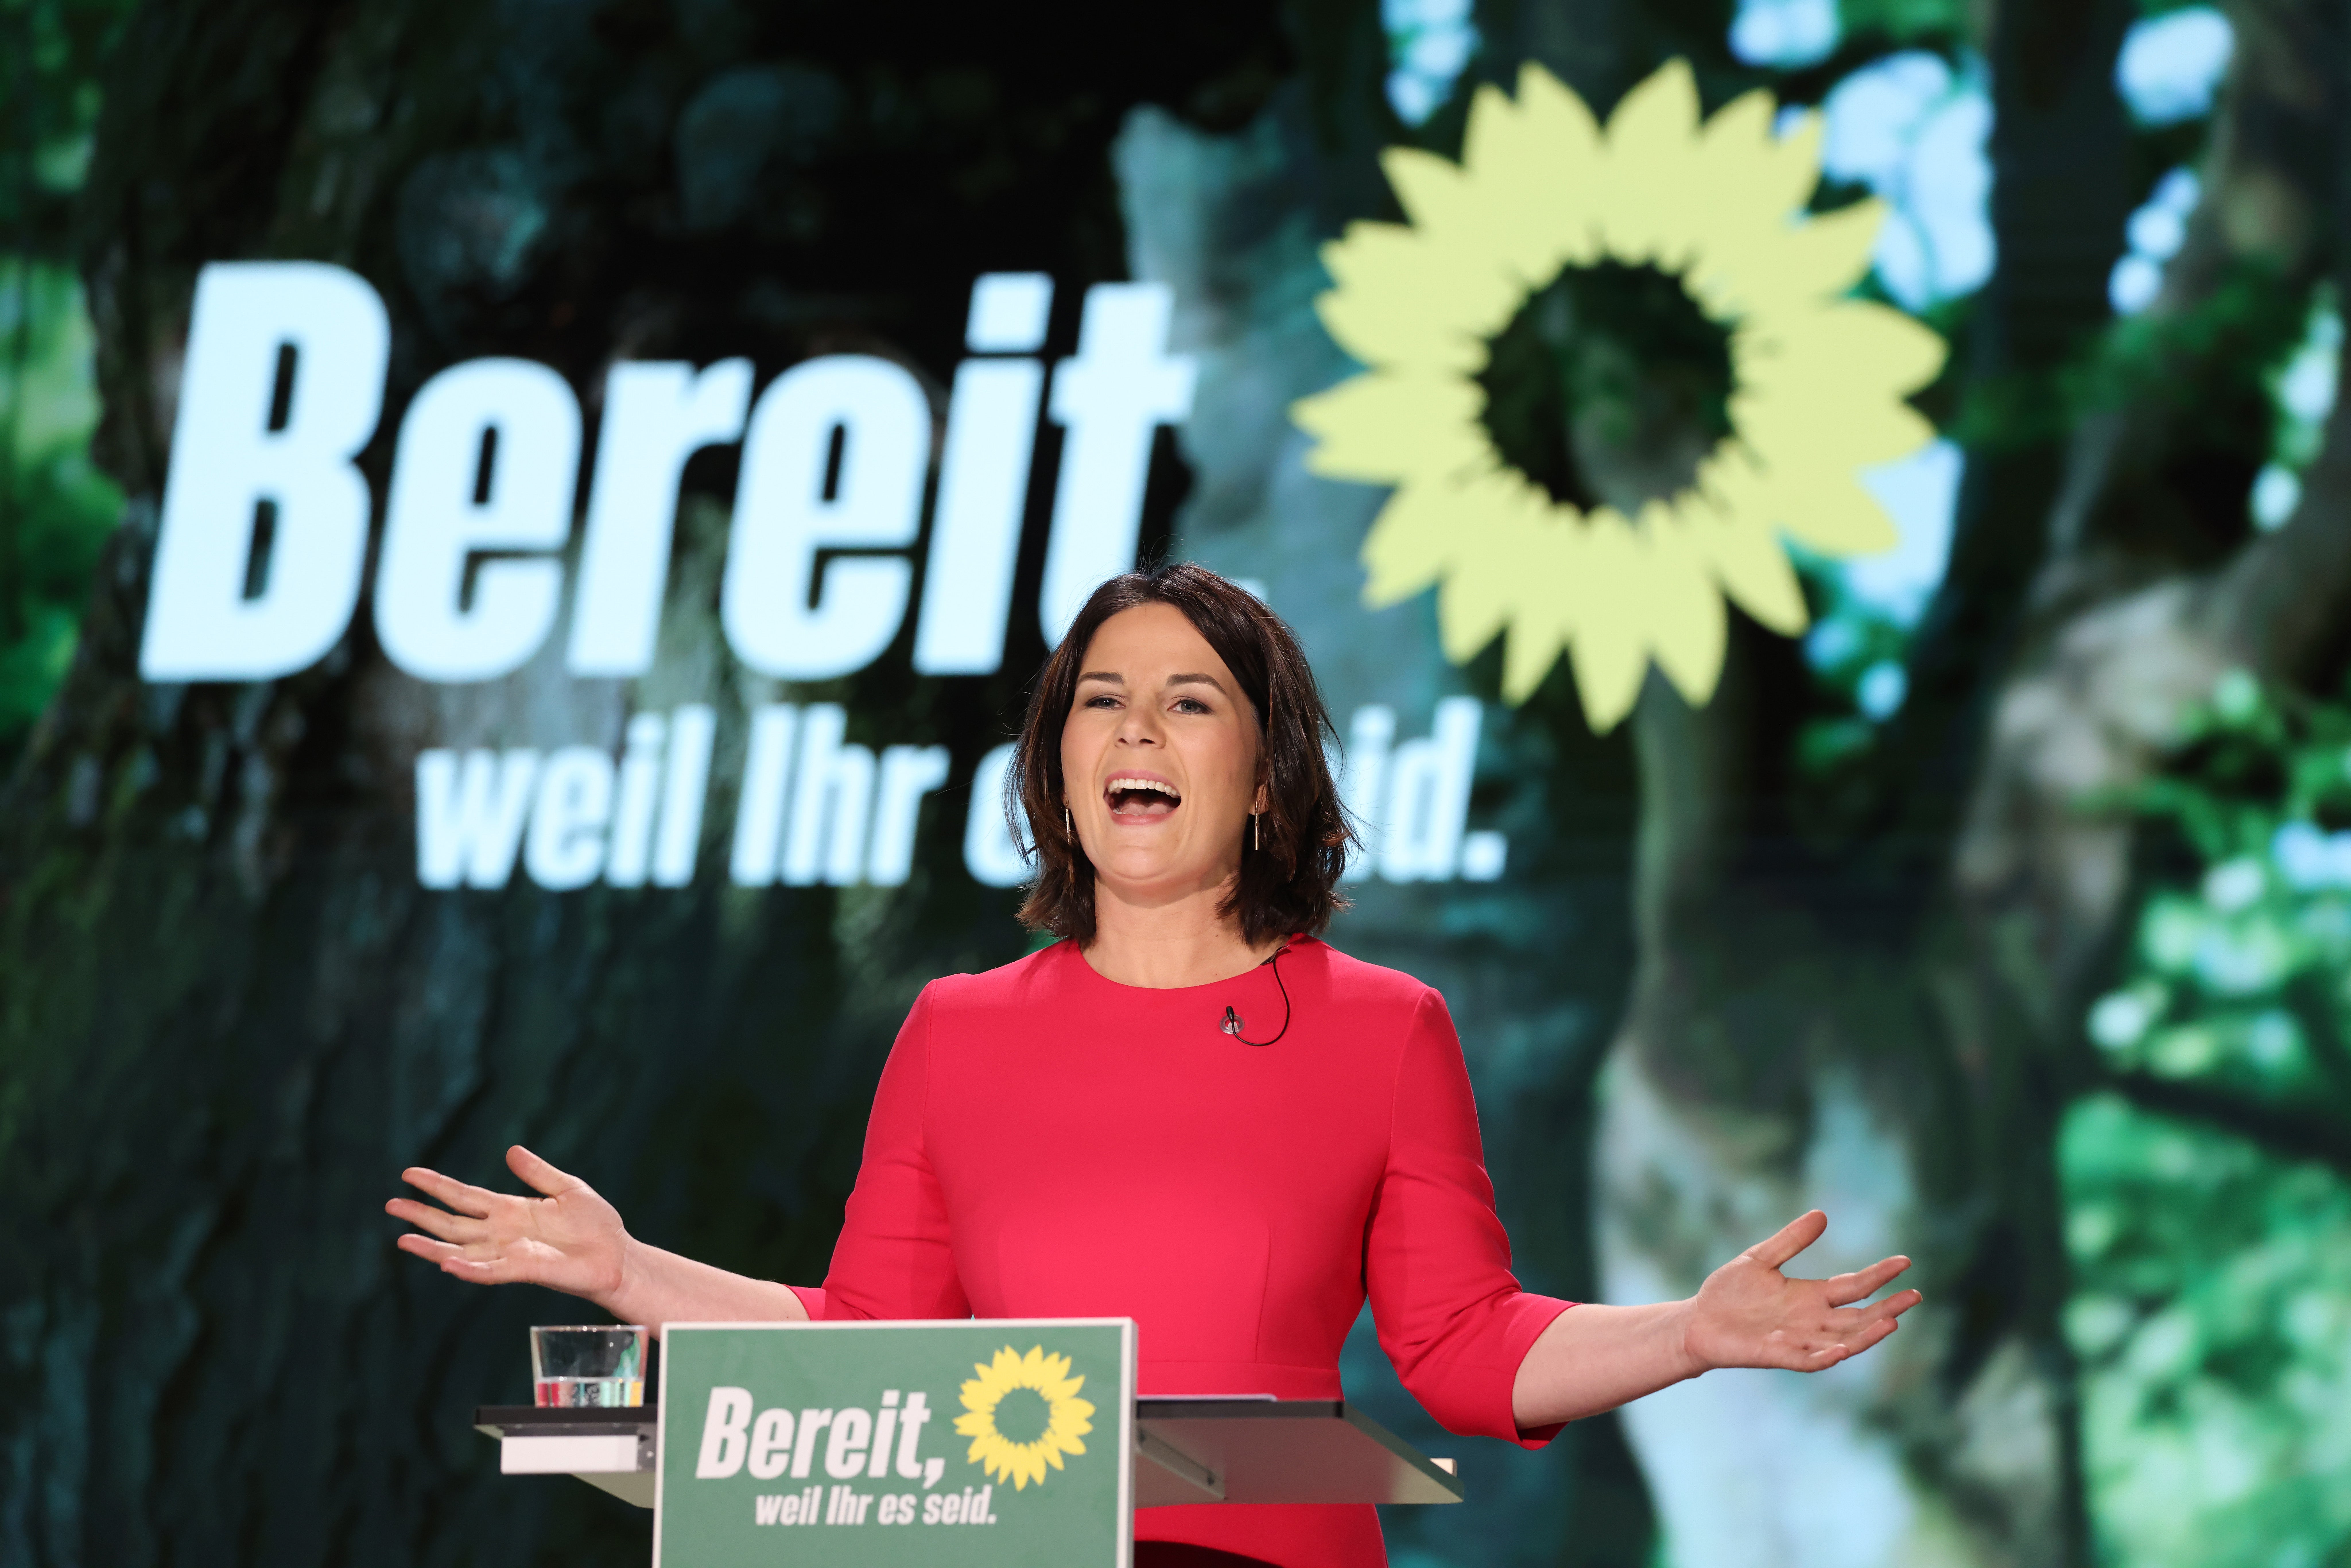 A long election campaign has exposed Annalena Baerbock’s relative inexperience